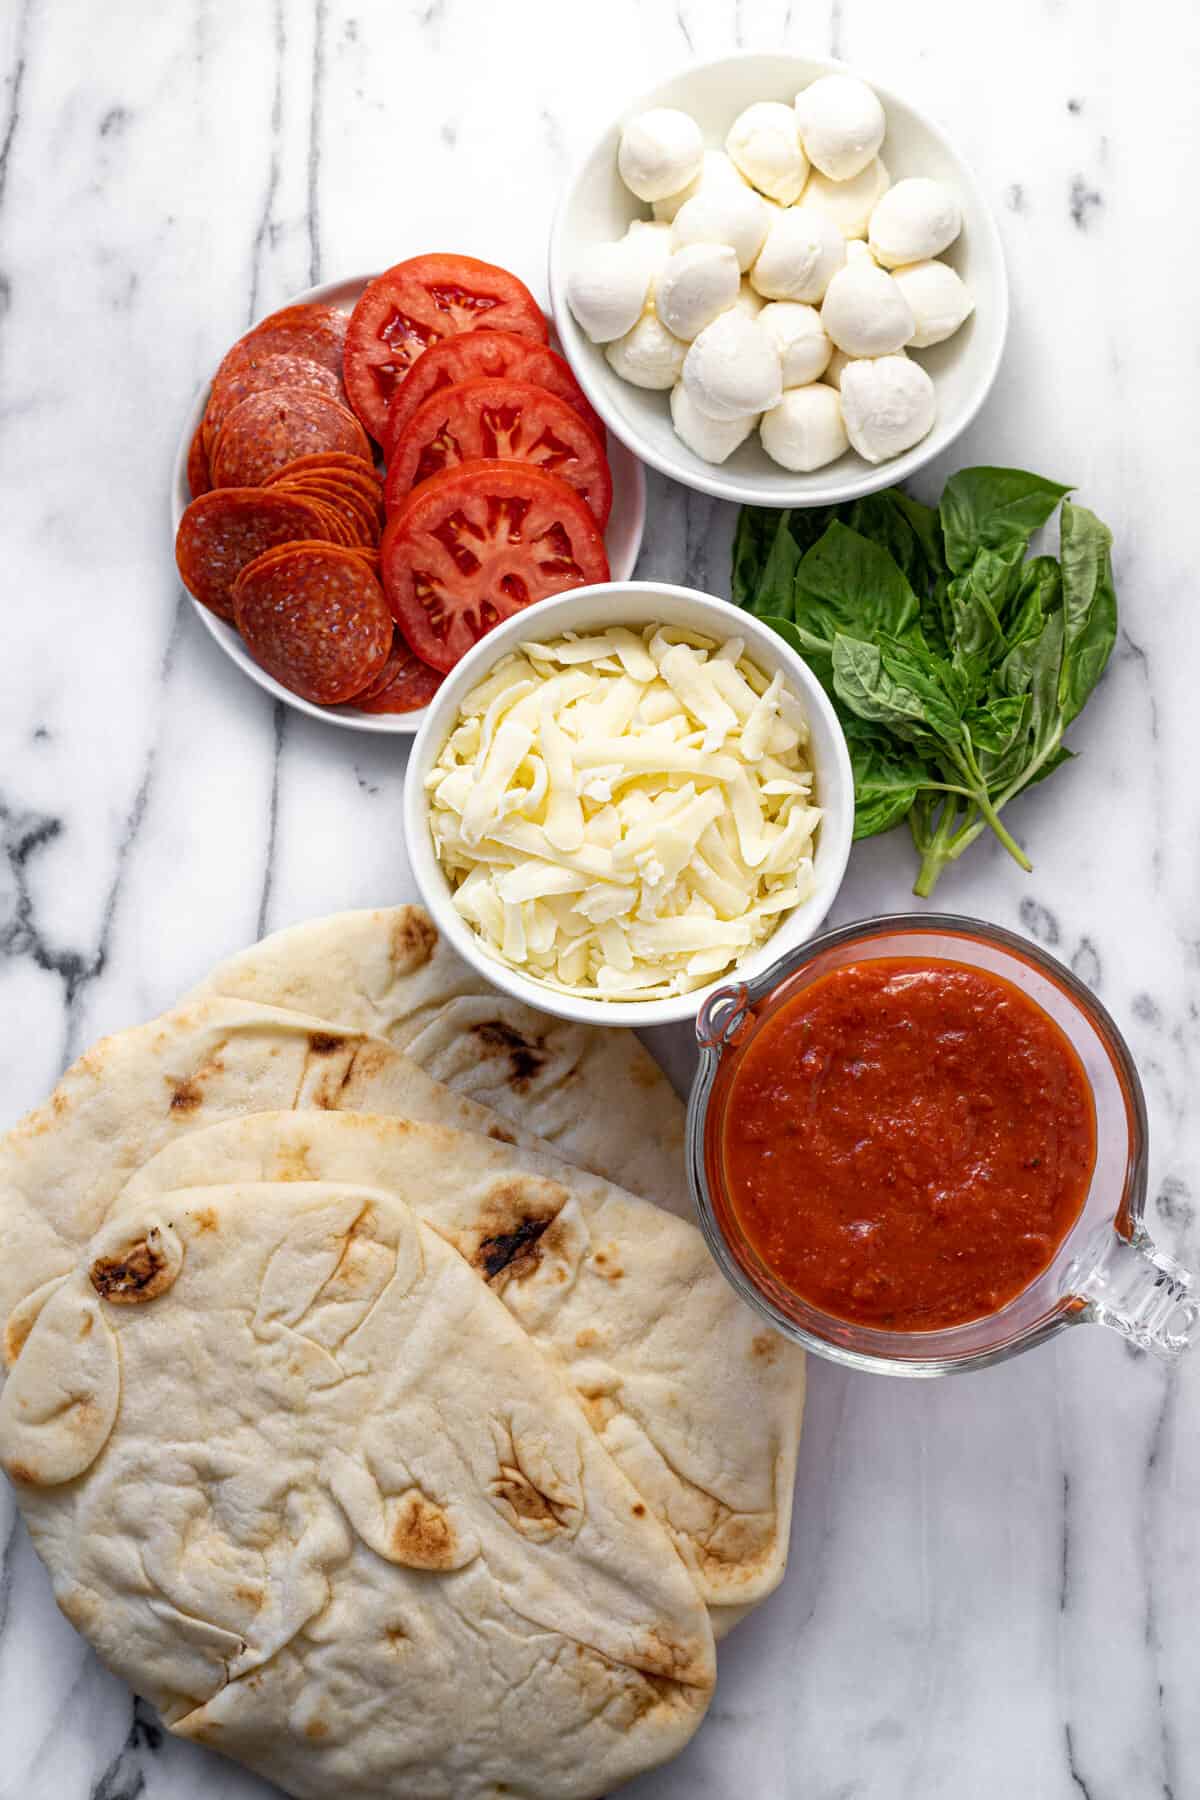 White marble counter top with ingredients to make naan pizza.